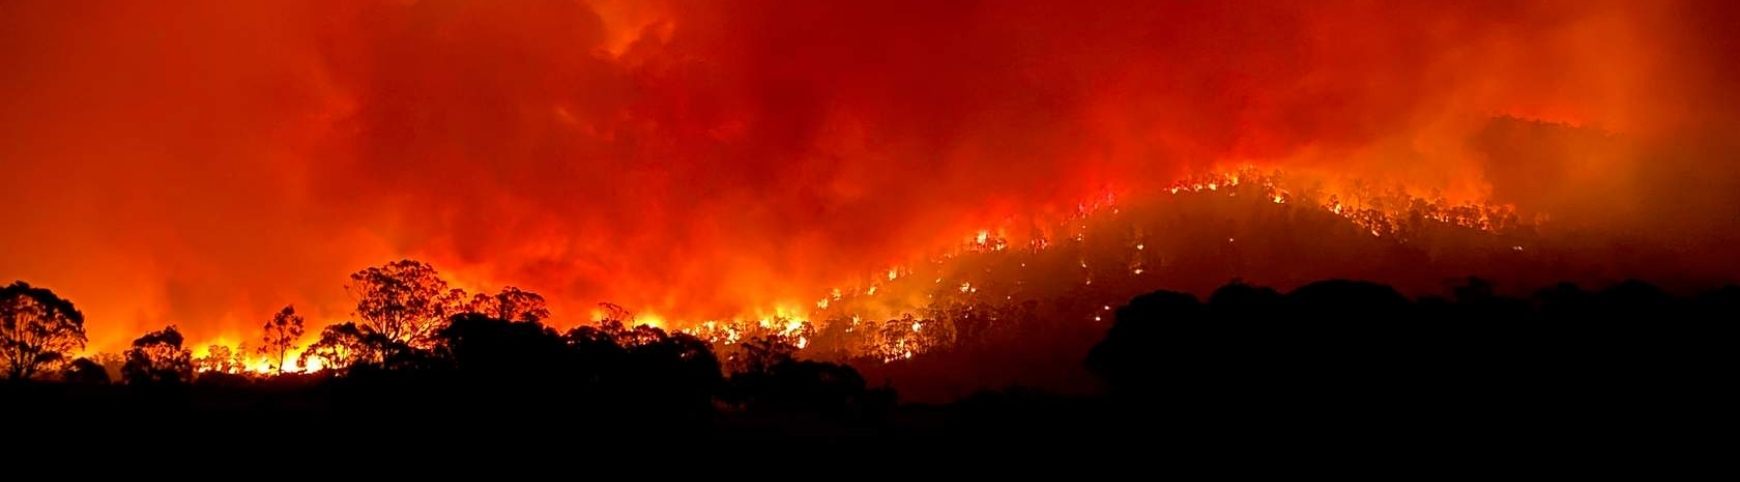 AFDRS 1A: Introduction to the Australian Fire Danger Rating System